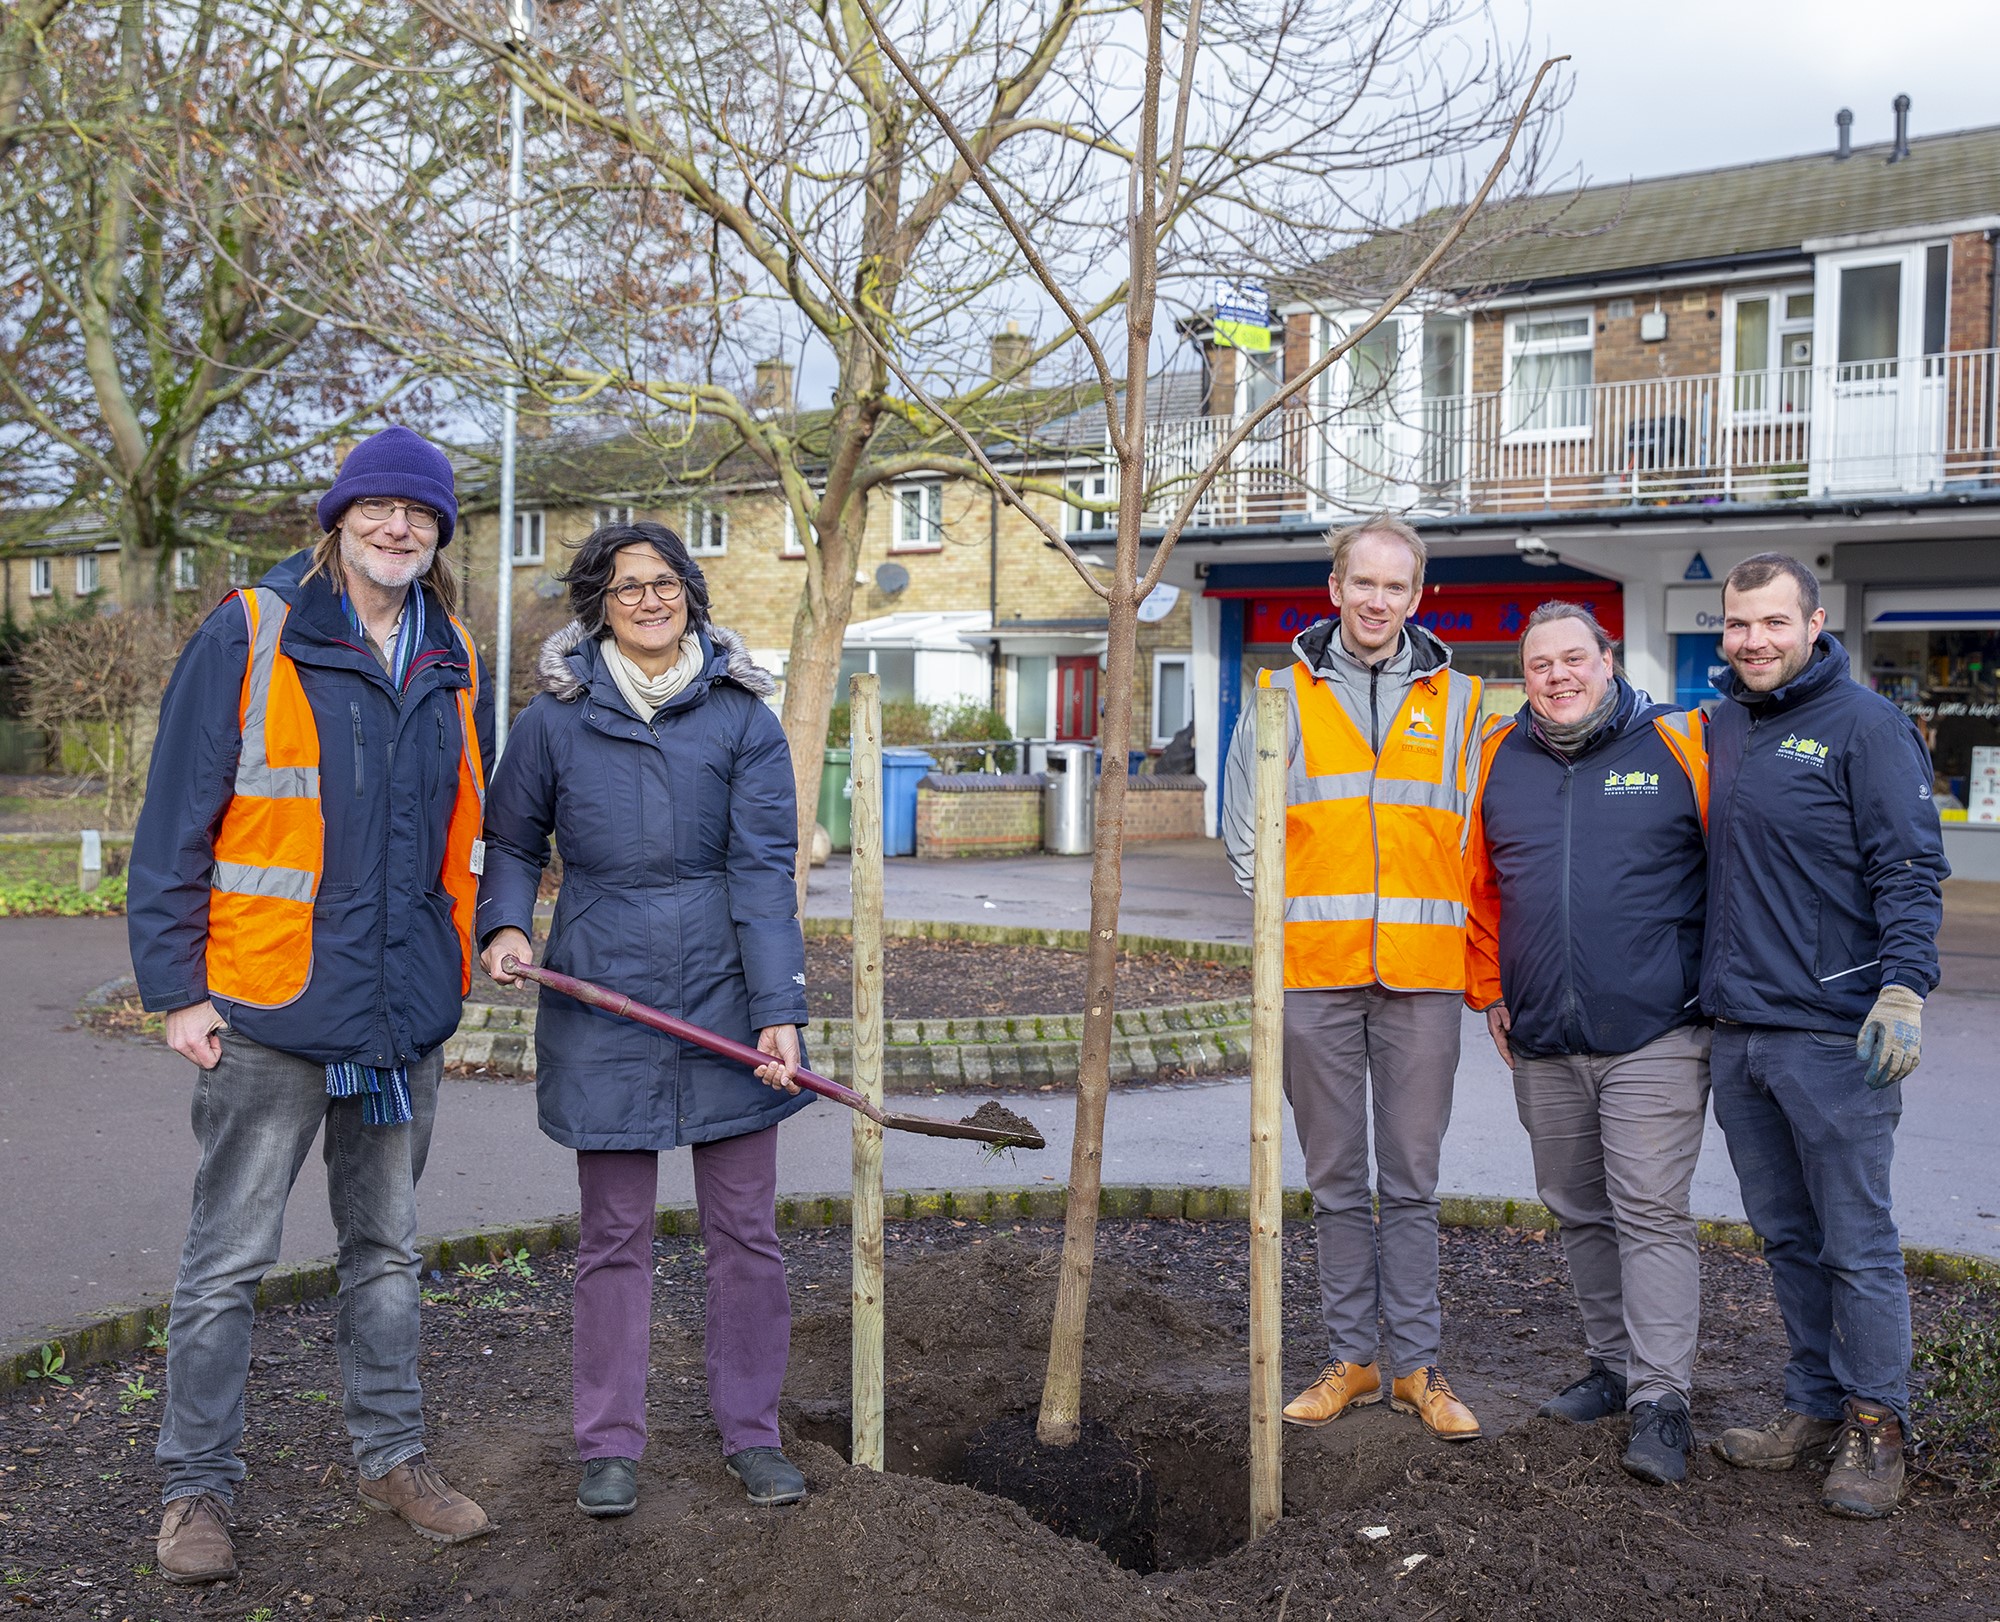 The Cambridge Canopy Project commences planting new trees in the City